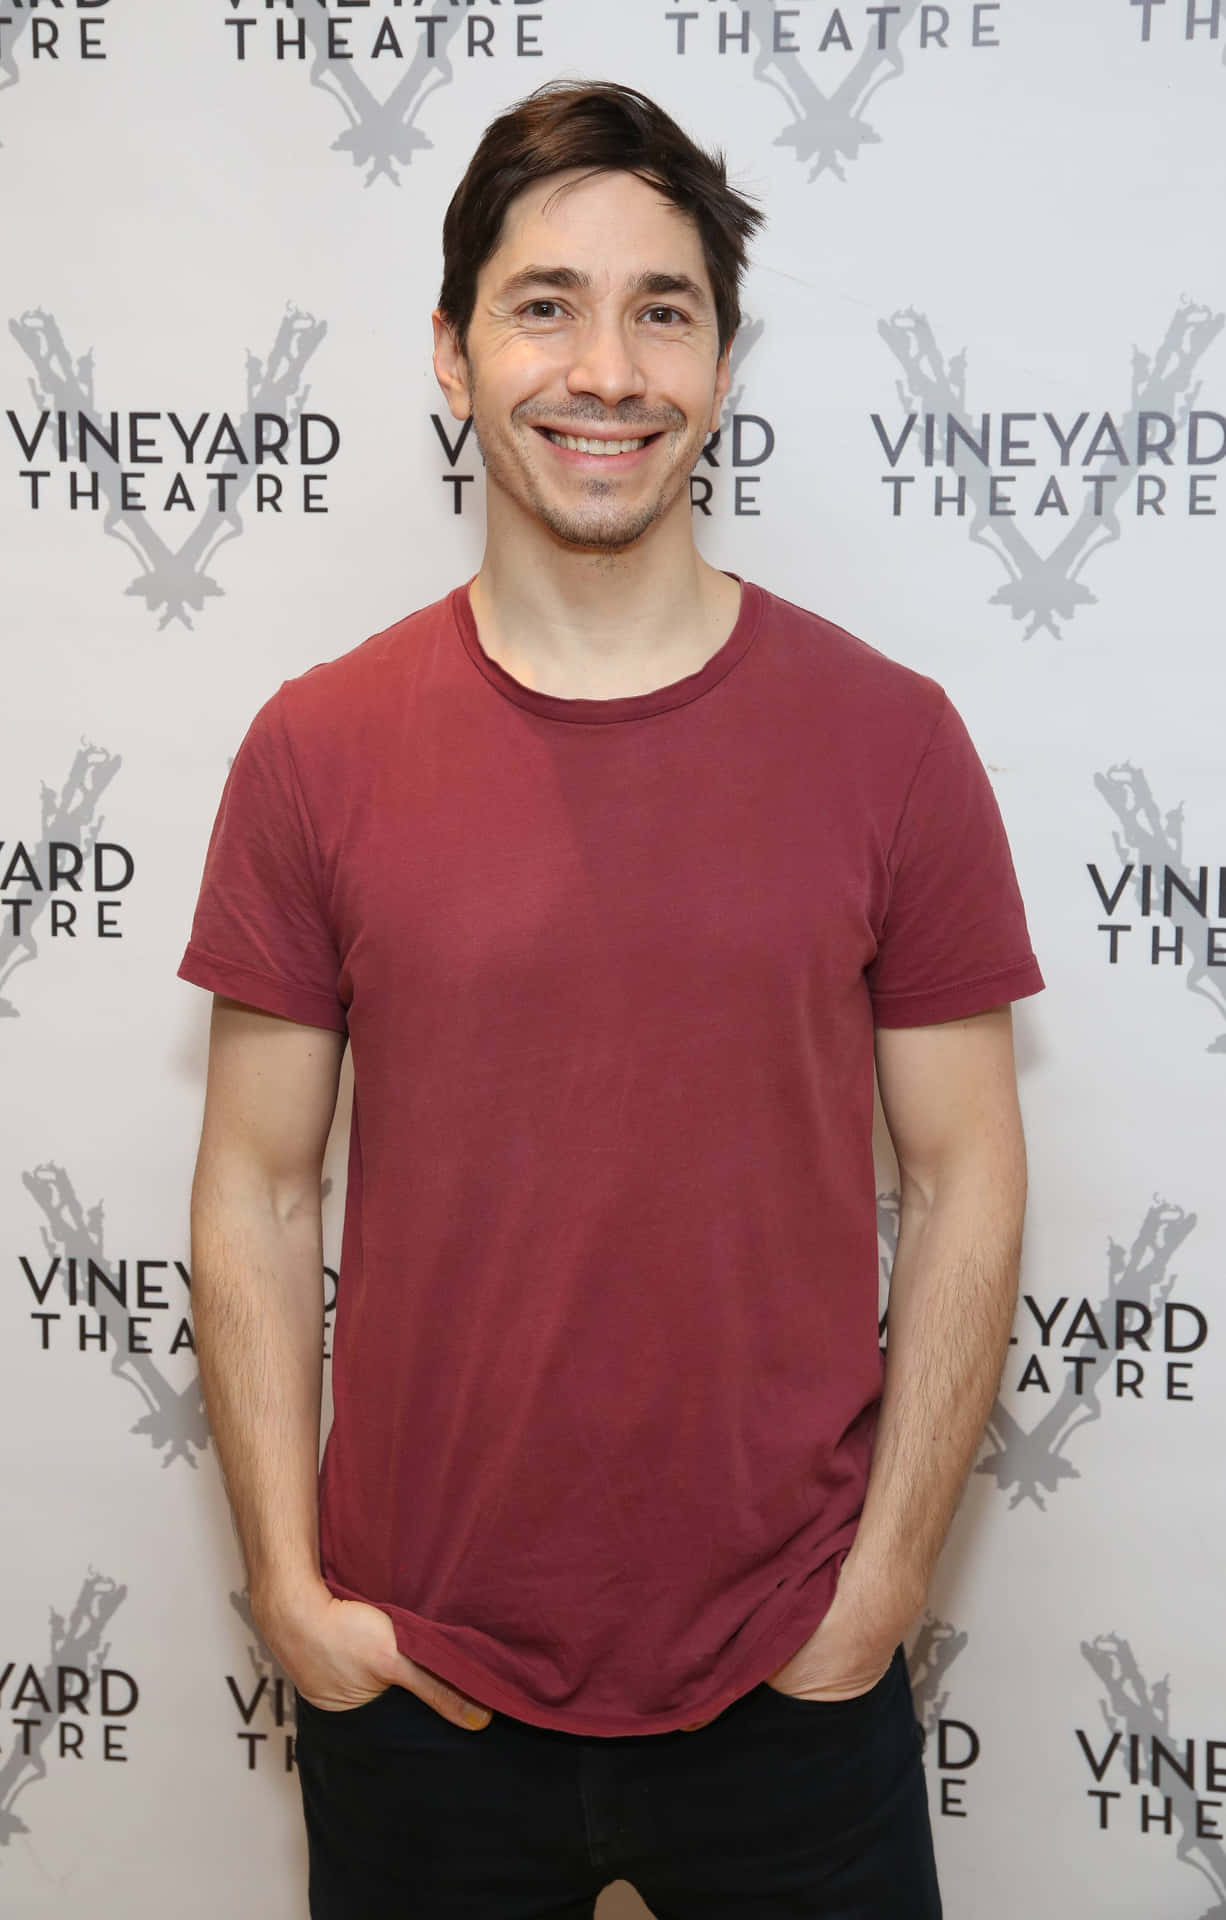 Justin Long on the red carpet looking confident and stylish Wallpaper